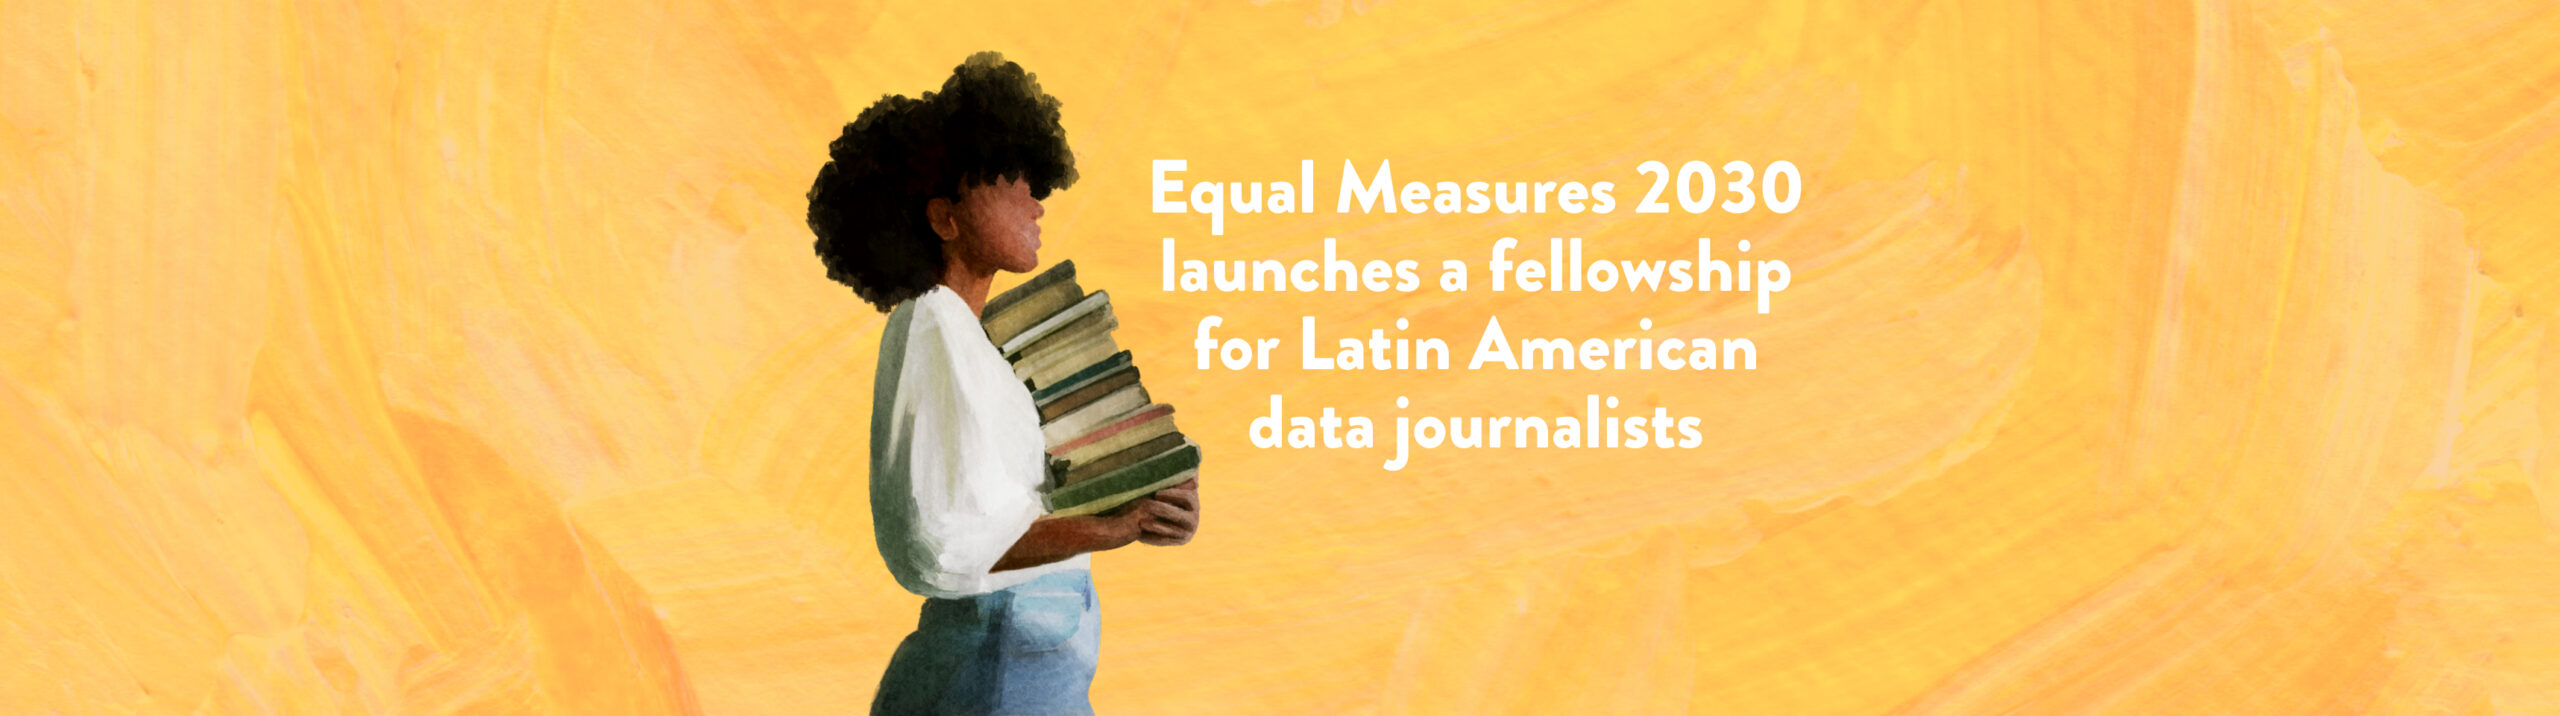 Equal Measures 2030 launches a fellowship for Latin American data journalists 